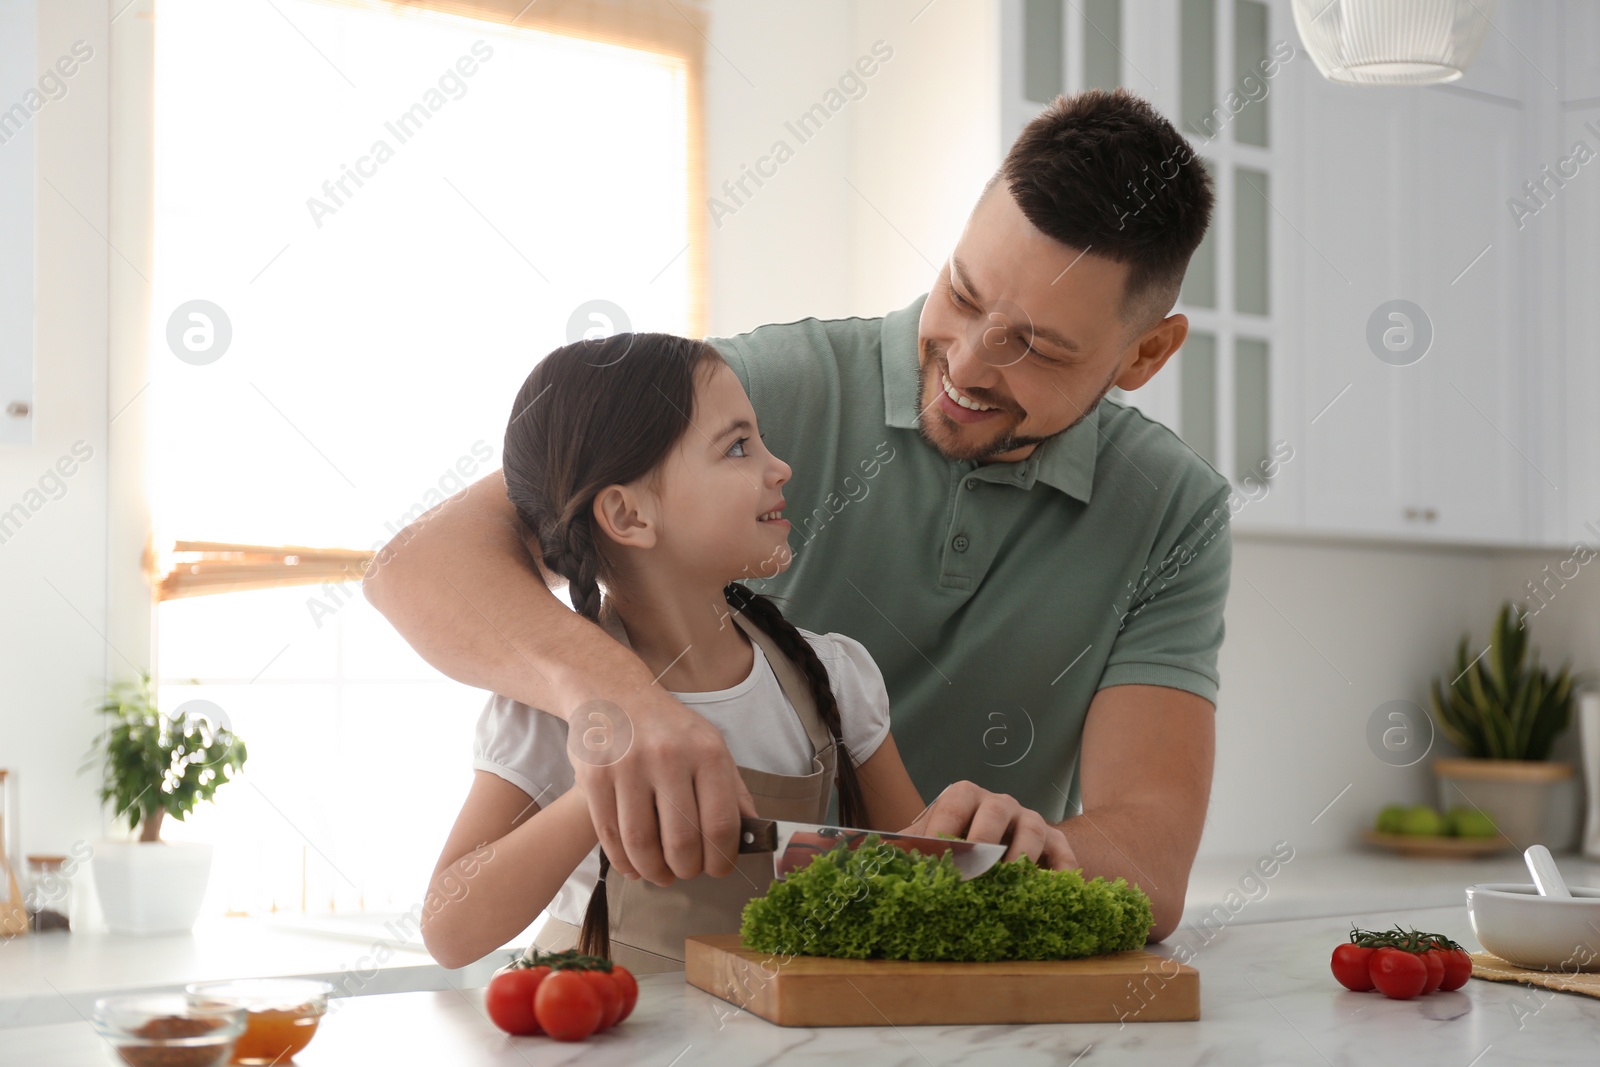 Photo of Father and daughter cutting lettuce in kitchen. Cooking together